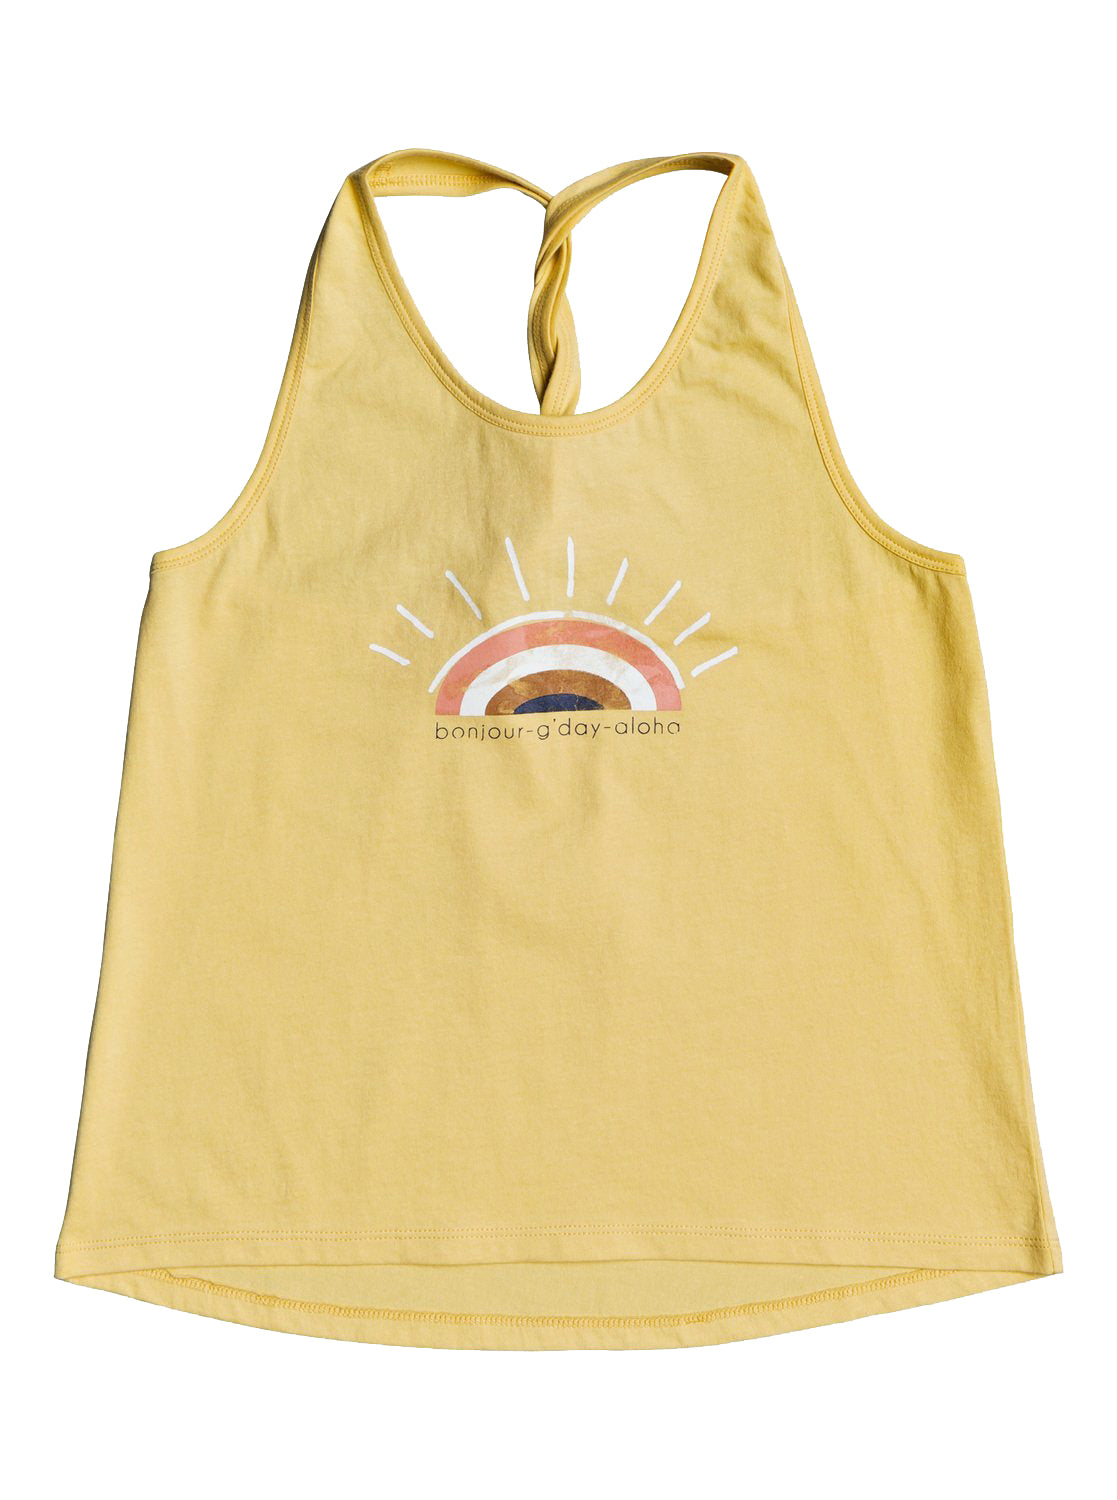 Roxy Wish You The Best Girls Tank Top YGD0 4